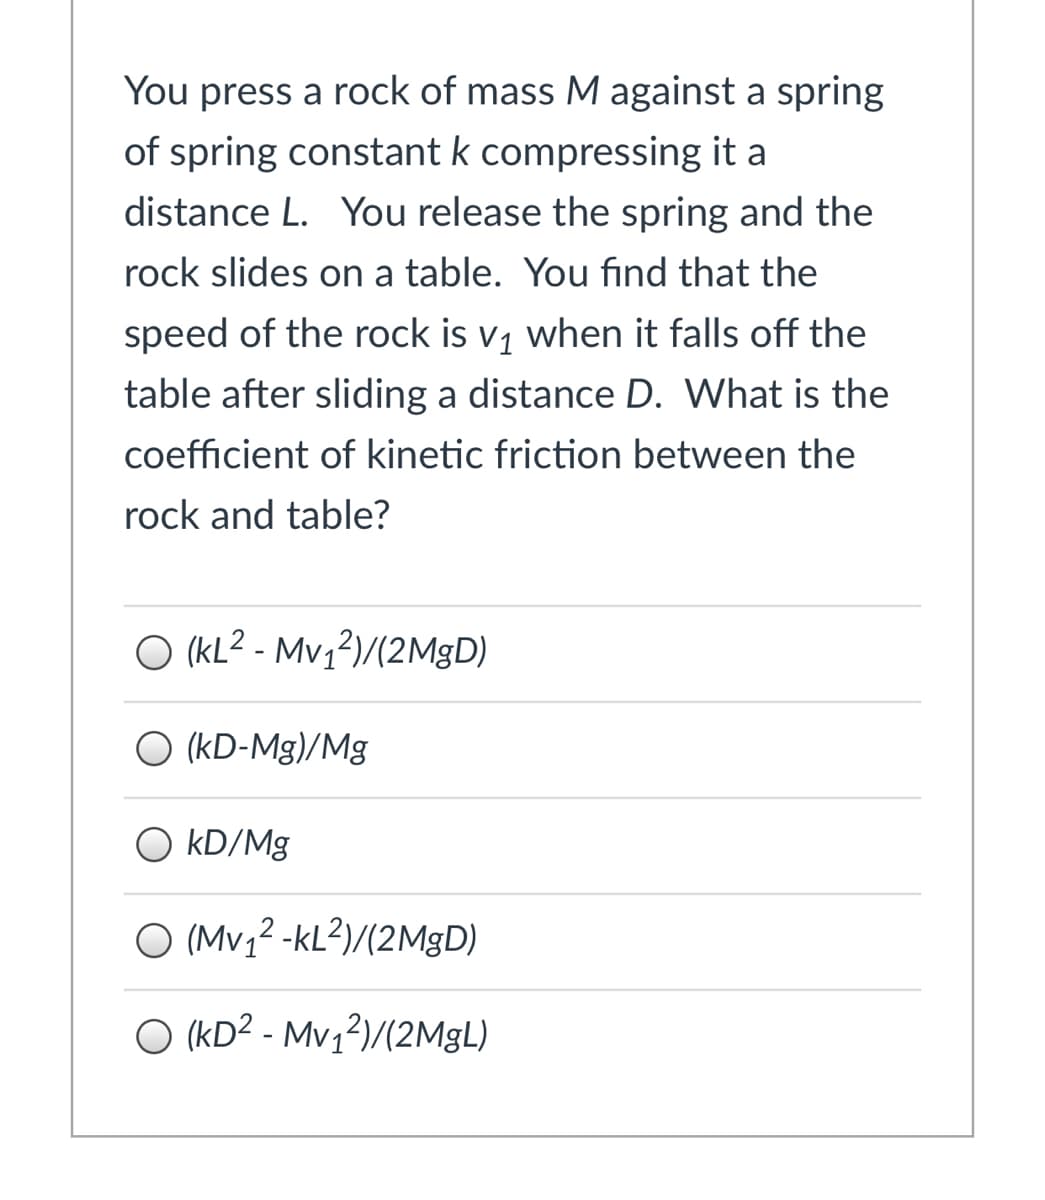 You press a rock of mass M against a spring
of spring constant k compressing it a
distance L. You release the spring and the
rock slides on a table. You find that the
speed of the rock is v1 when it falls off the
table after sliding a distance D. What is the
coefficient of kinetic friction between the
rock and table?
O (KL2 - Mv;?)/(2M|D)
O (kD-Mg)/Mg
kD/Mg
O (Mv,² -kL?)/(2MGD)
O (KD² - Mv1²)/(2M9L)
